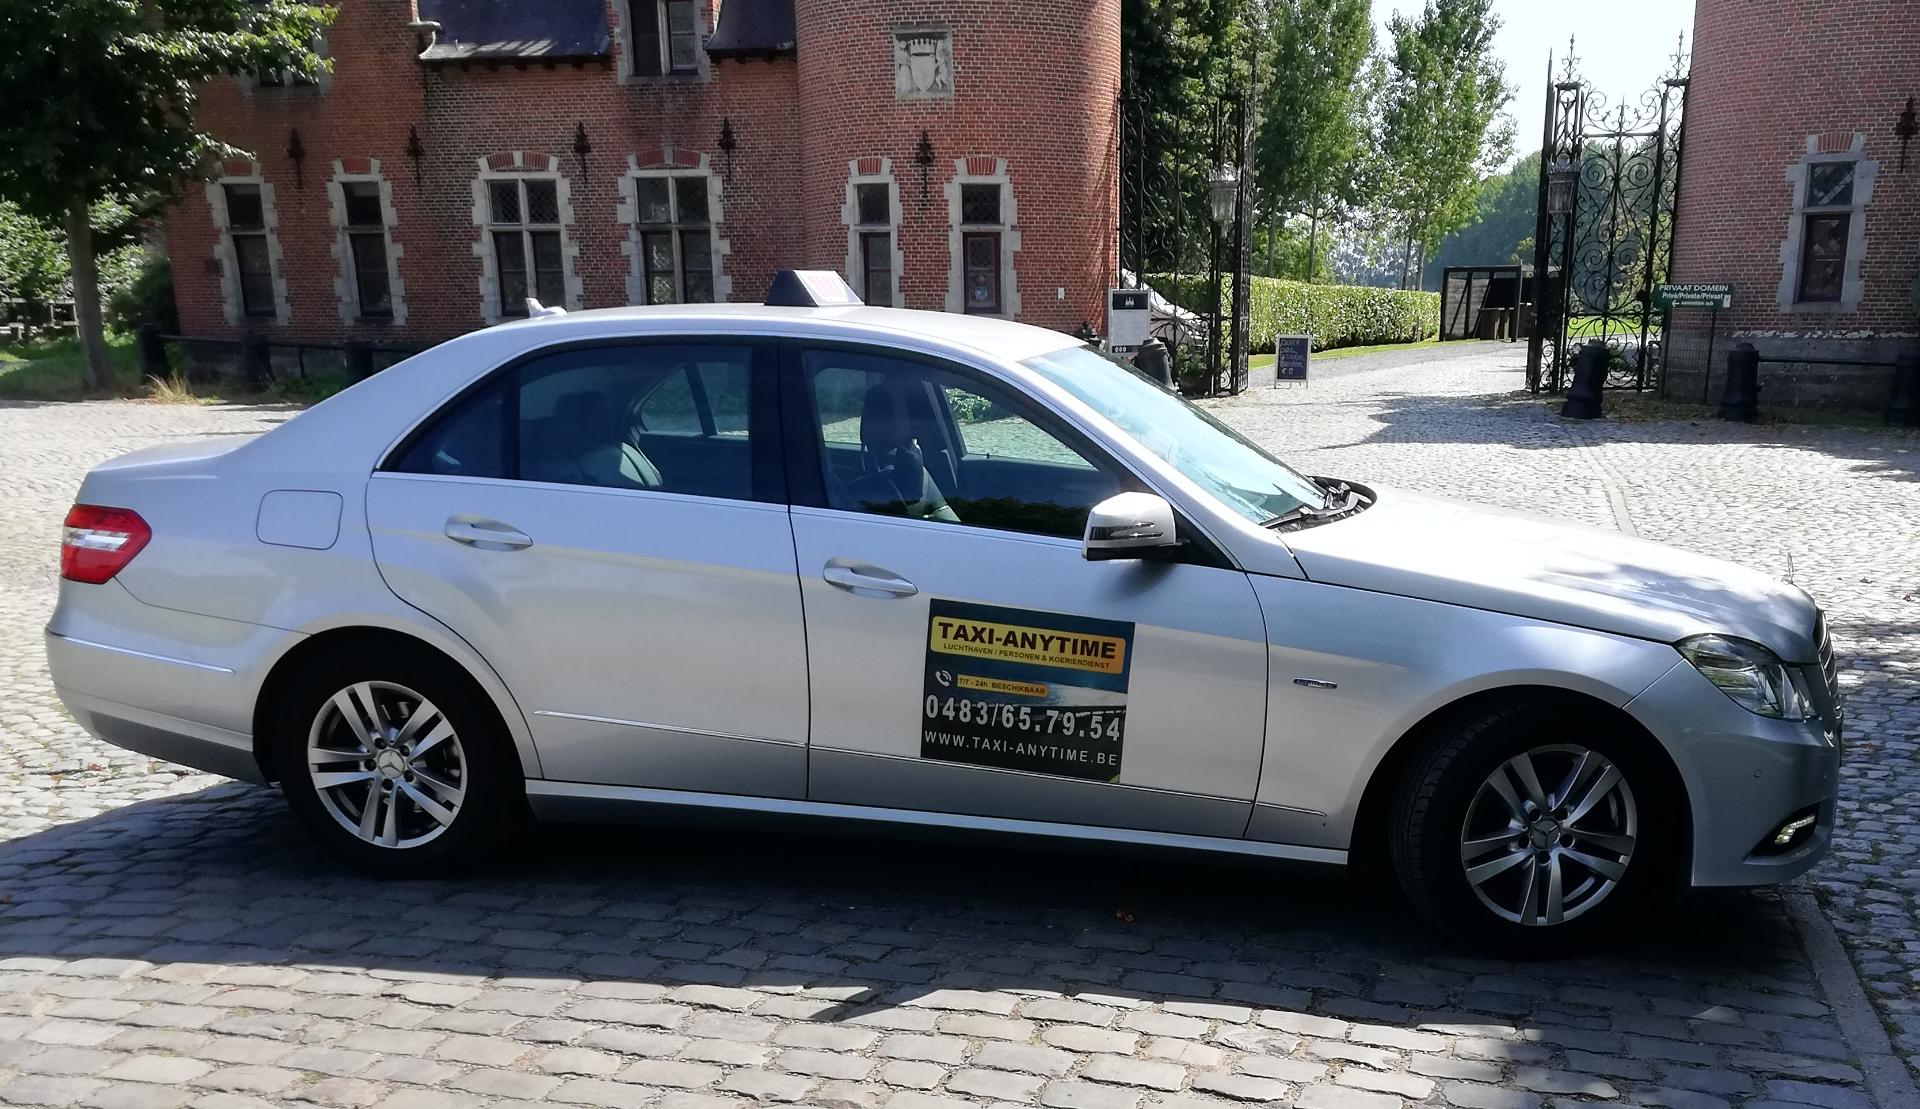 transportbedrijven Brecht Taxi Anytime